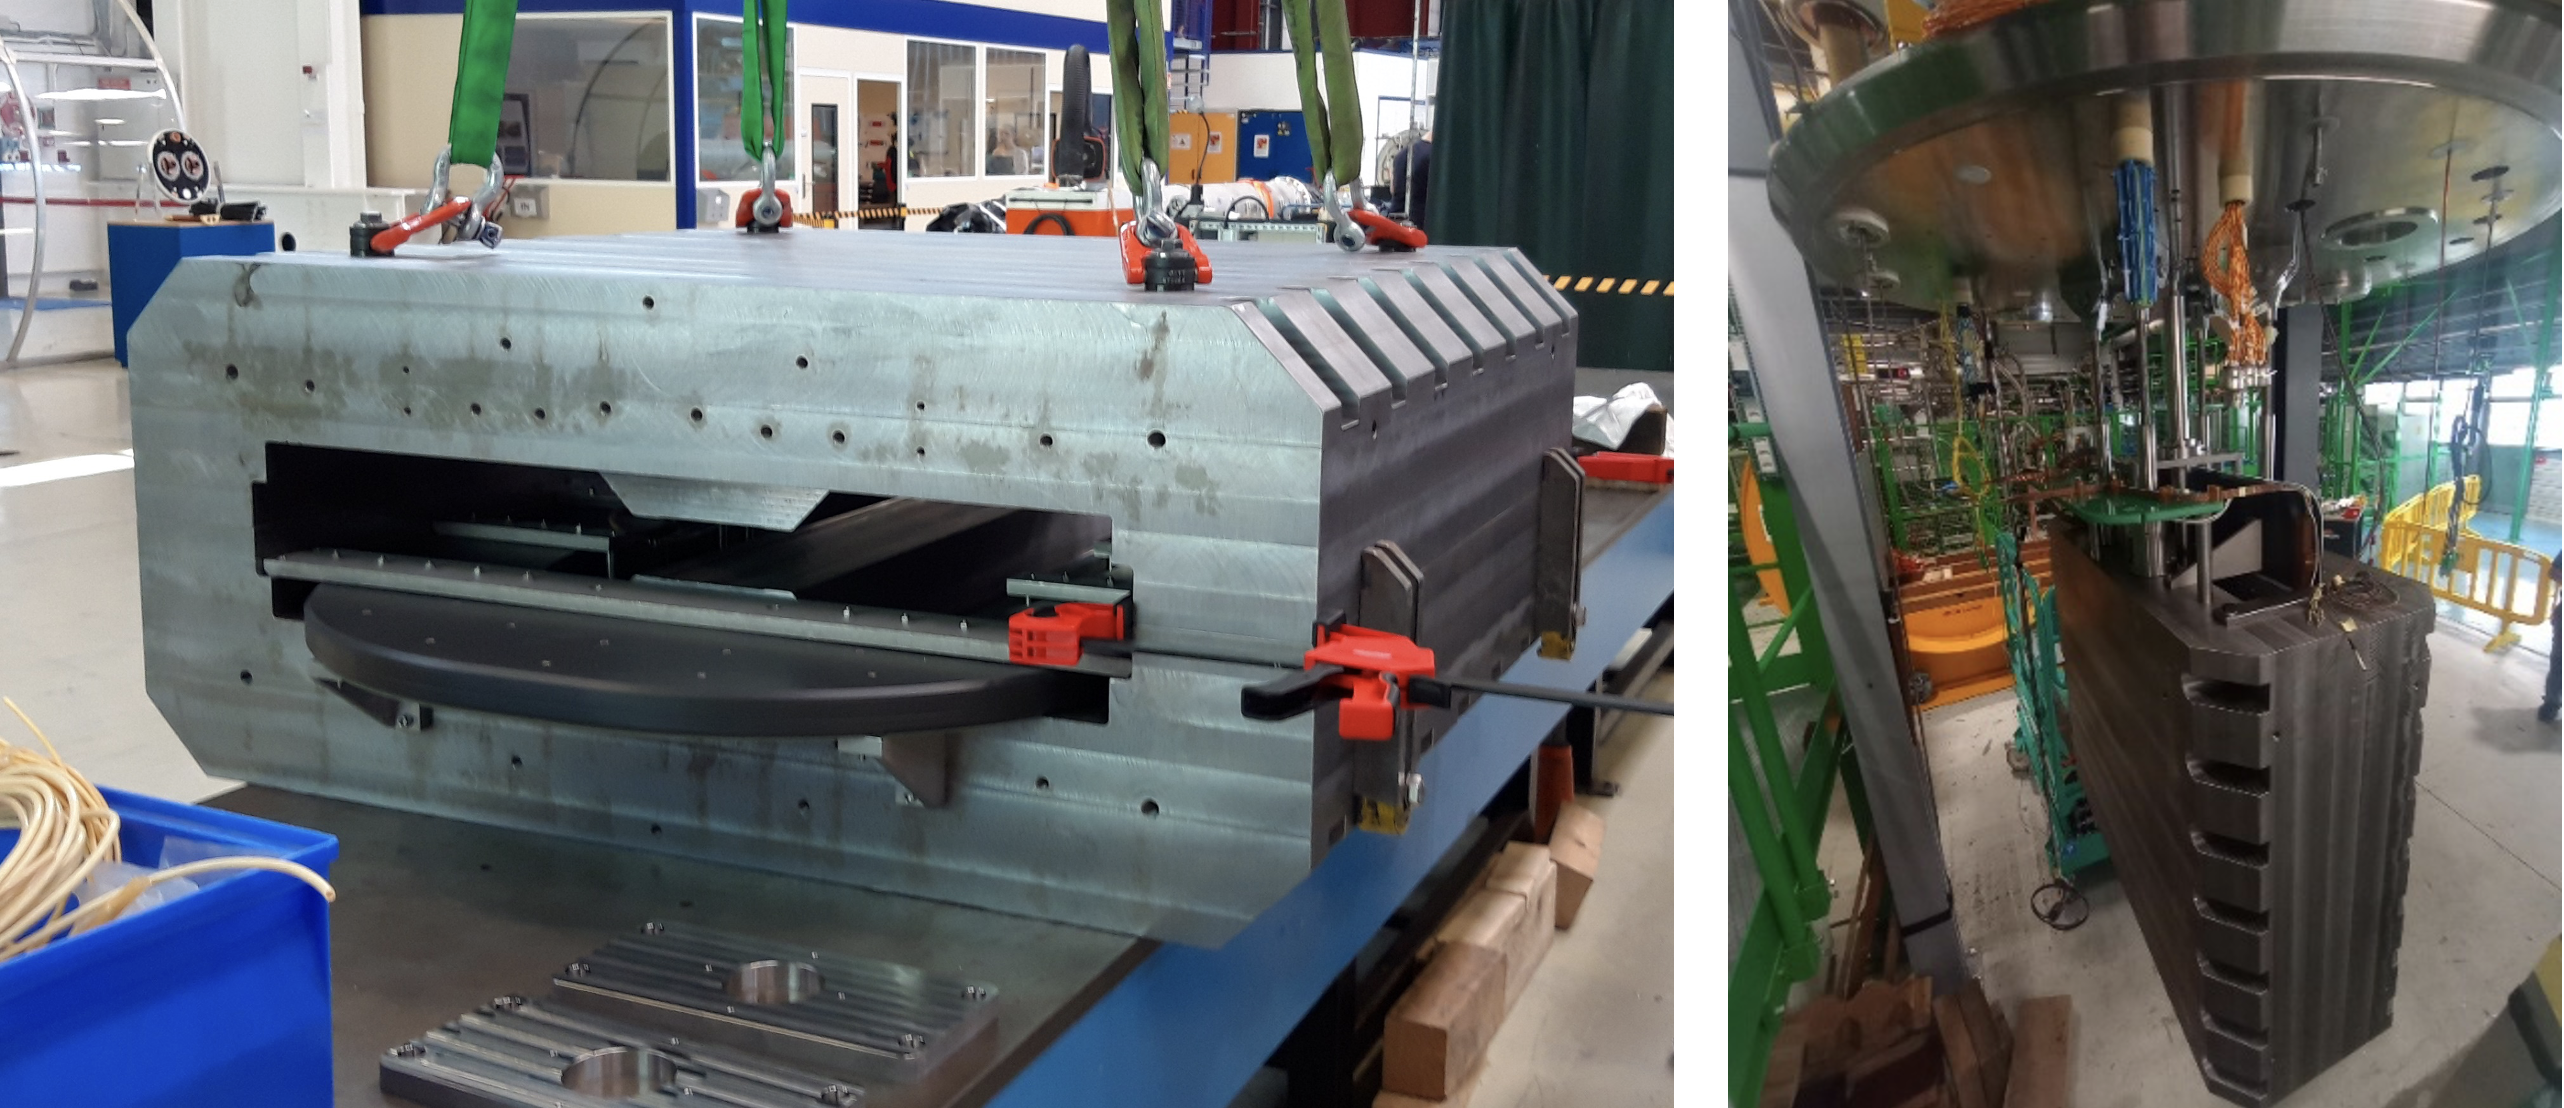 The demonstrator magnet in the horizontal position, during the last stages of assembly (left), as well as when attached to a vertical insert for testing in one of the CERN SM18 cryogenic test stations (right).  